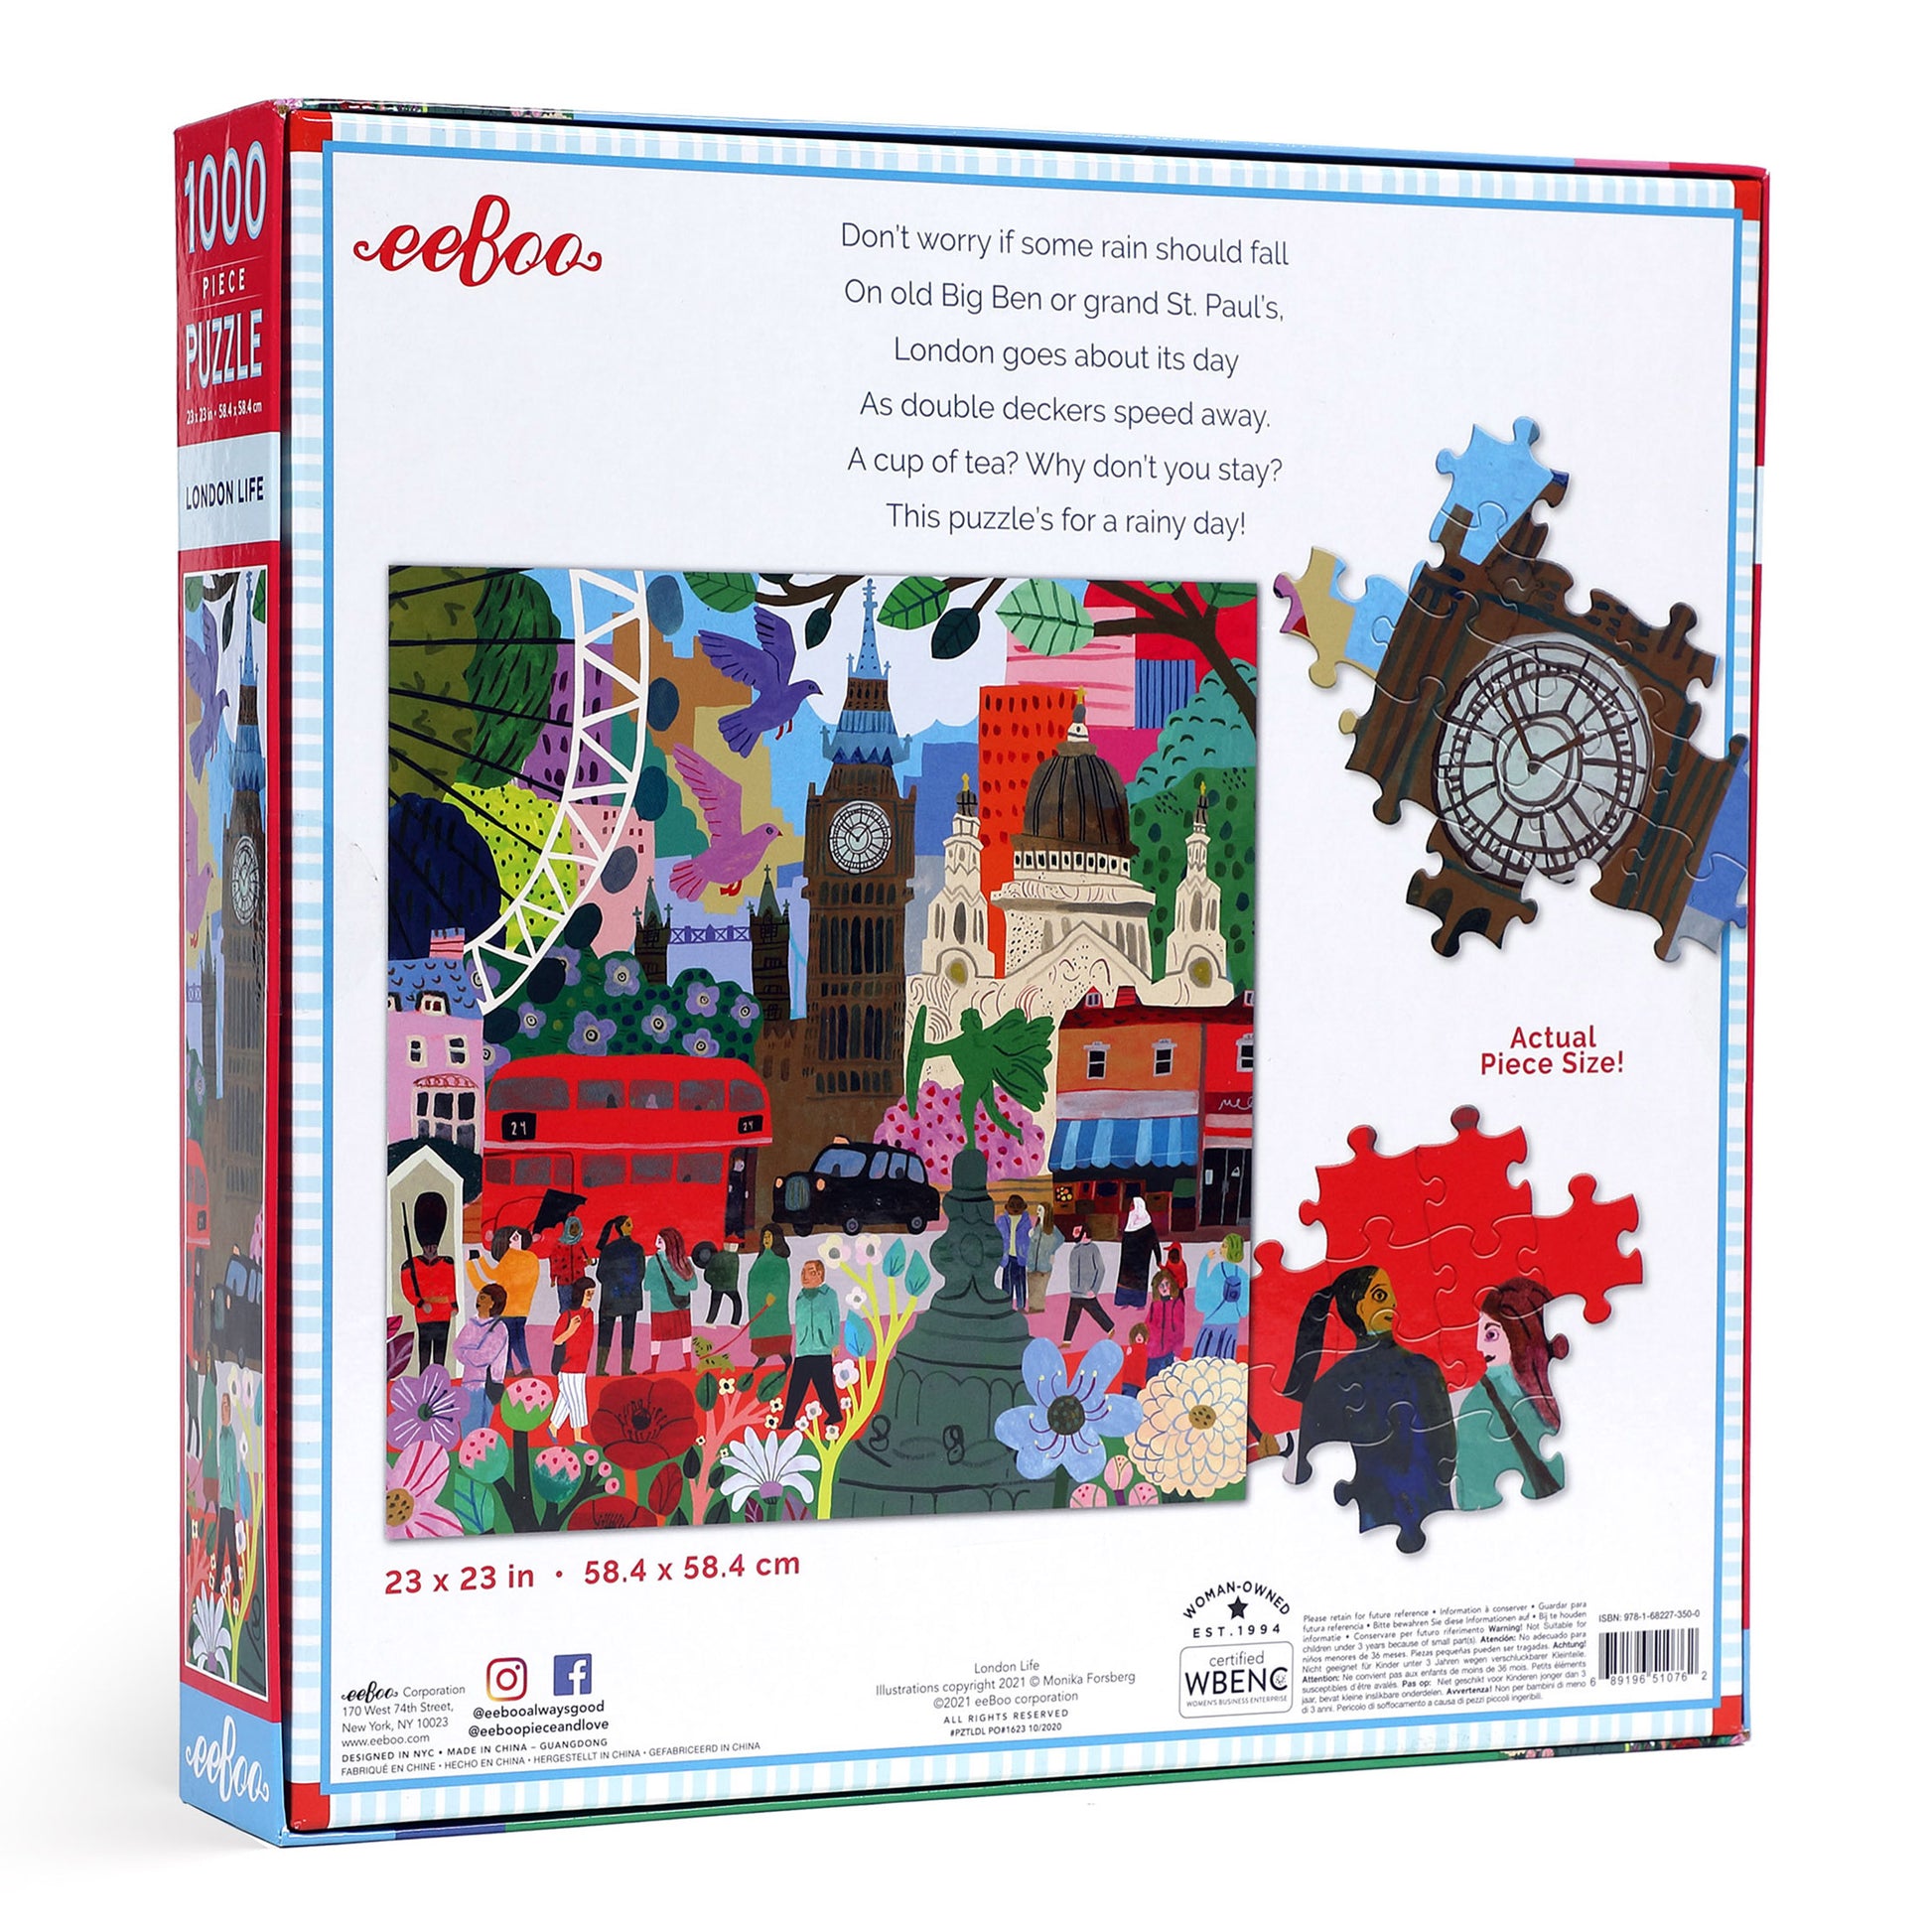 Galison - Puzzles, Games & Gifts - We bring art into everyday life